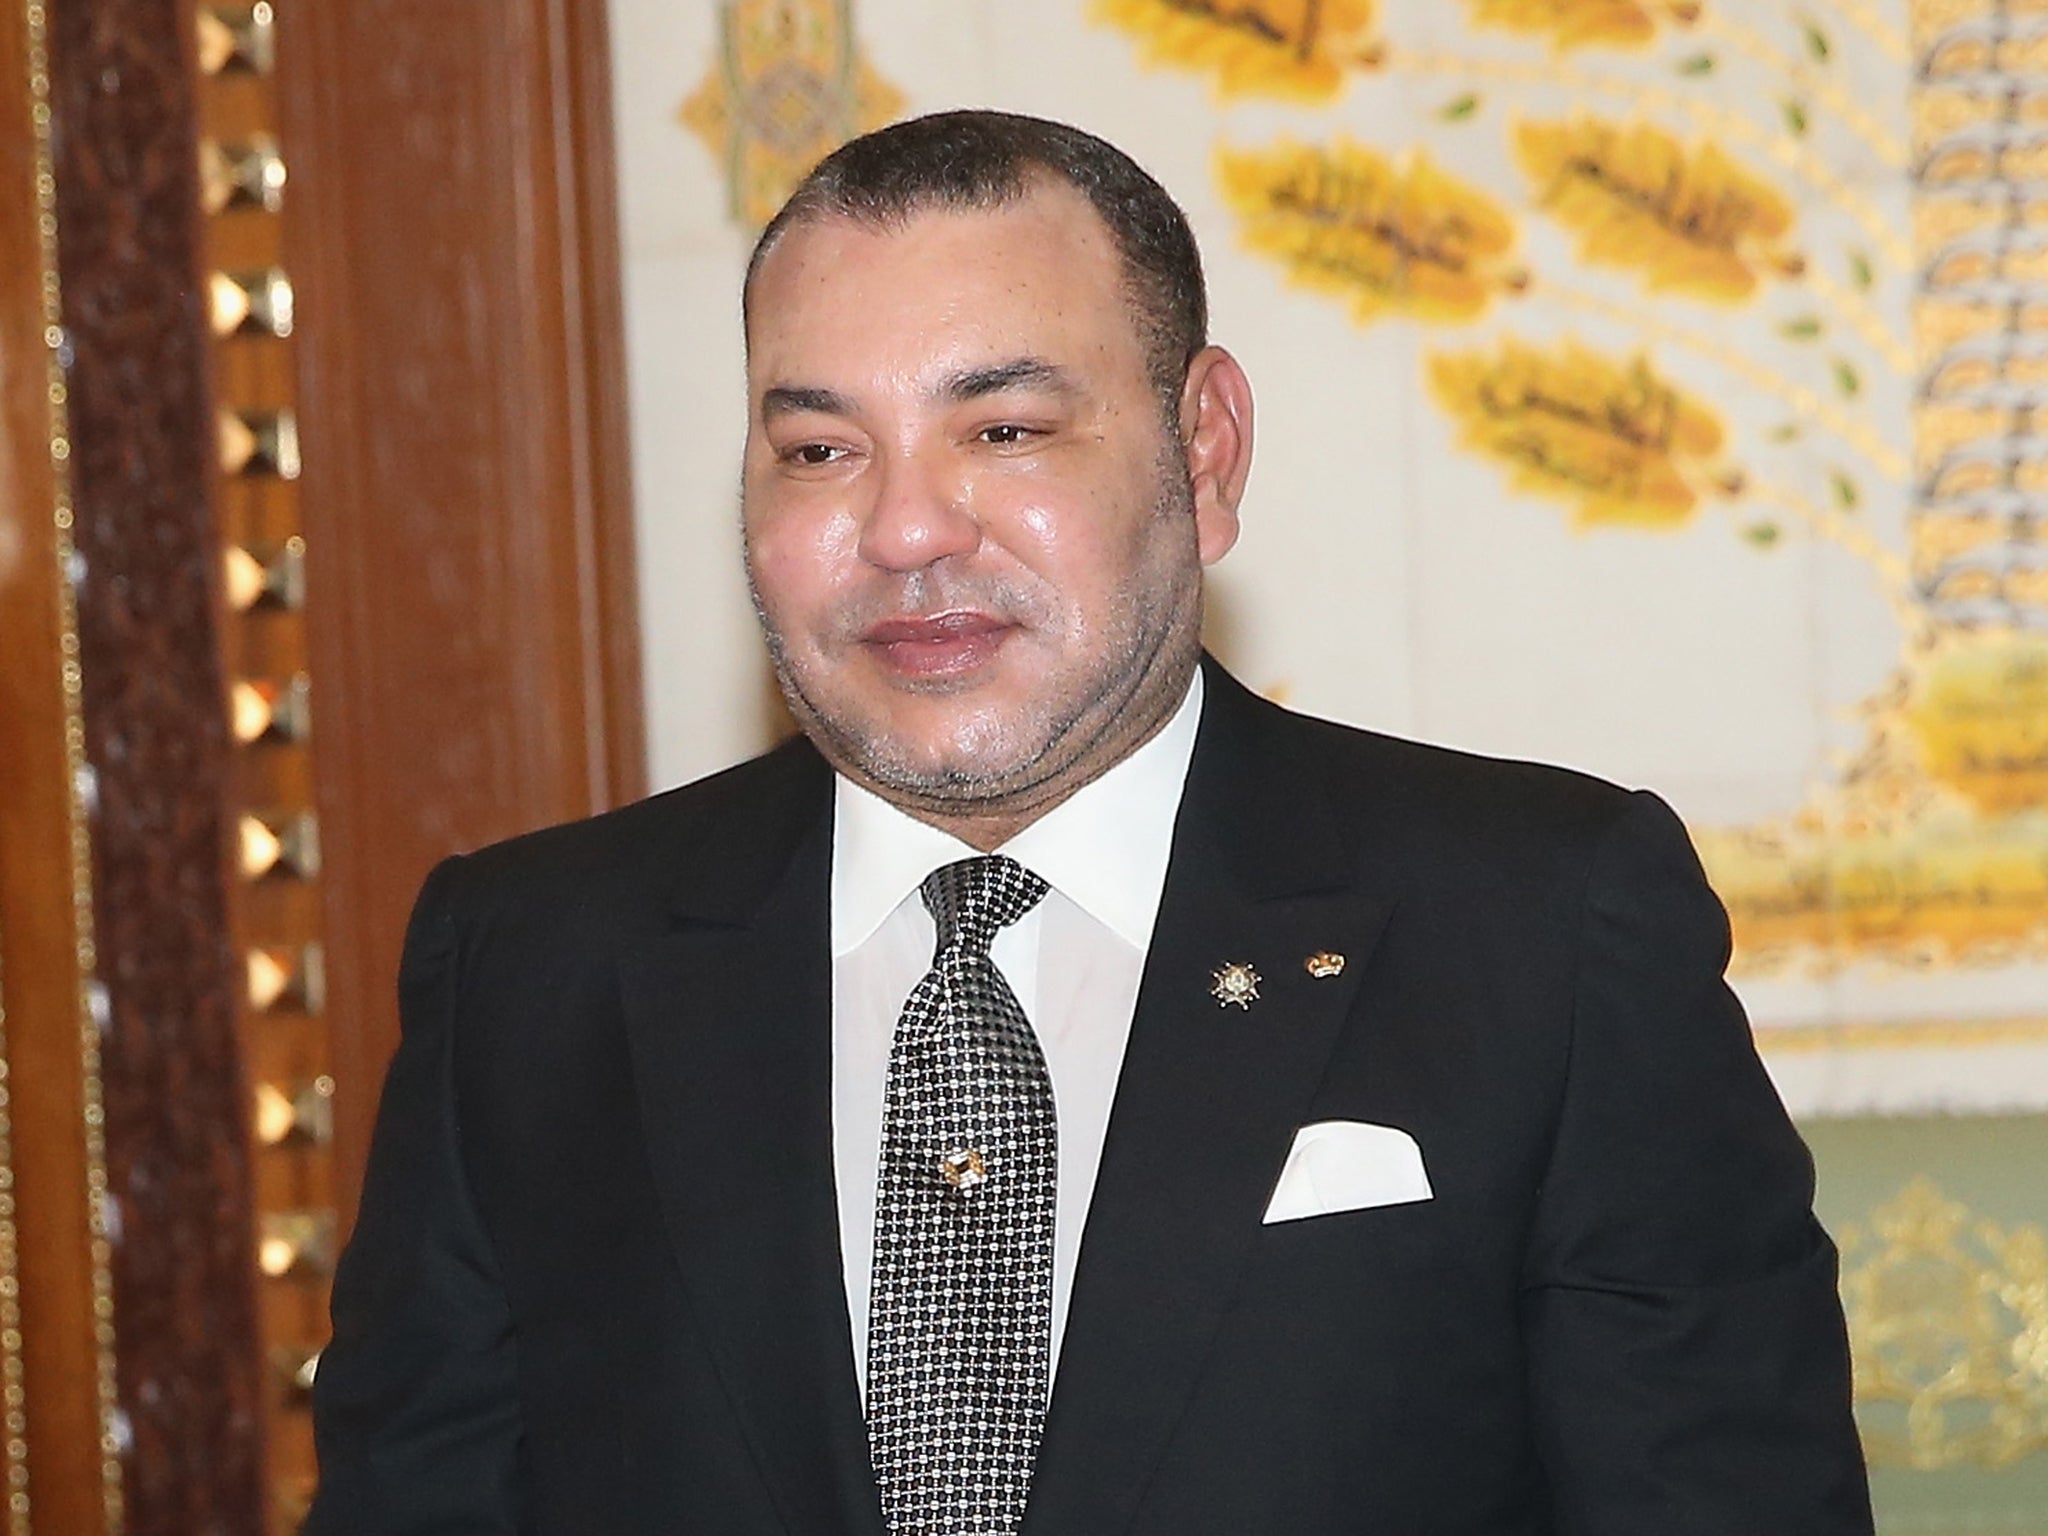 King Mohammed VI, head of the Moroccan government